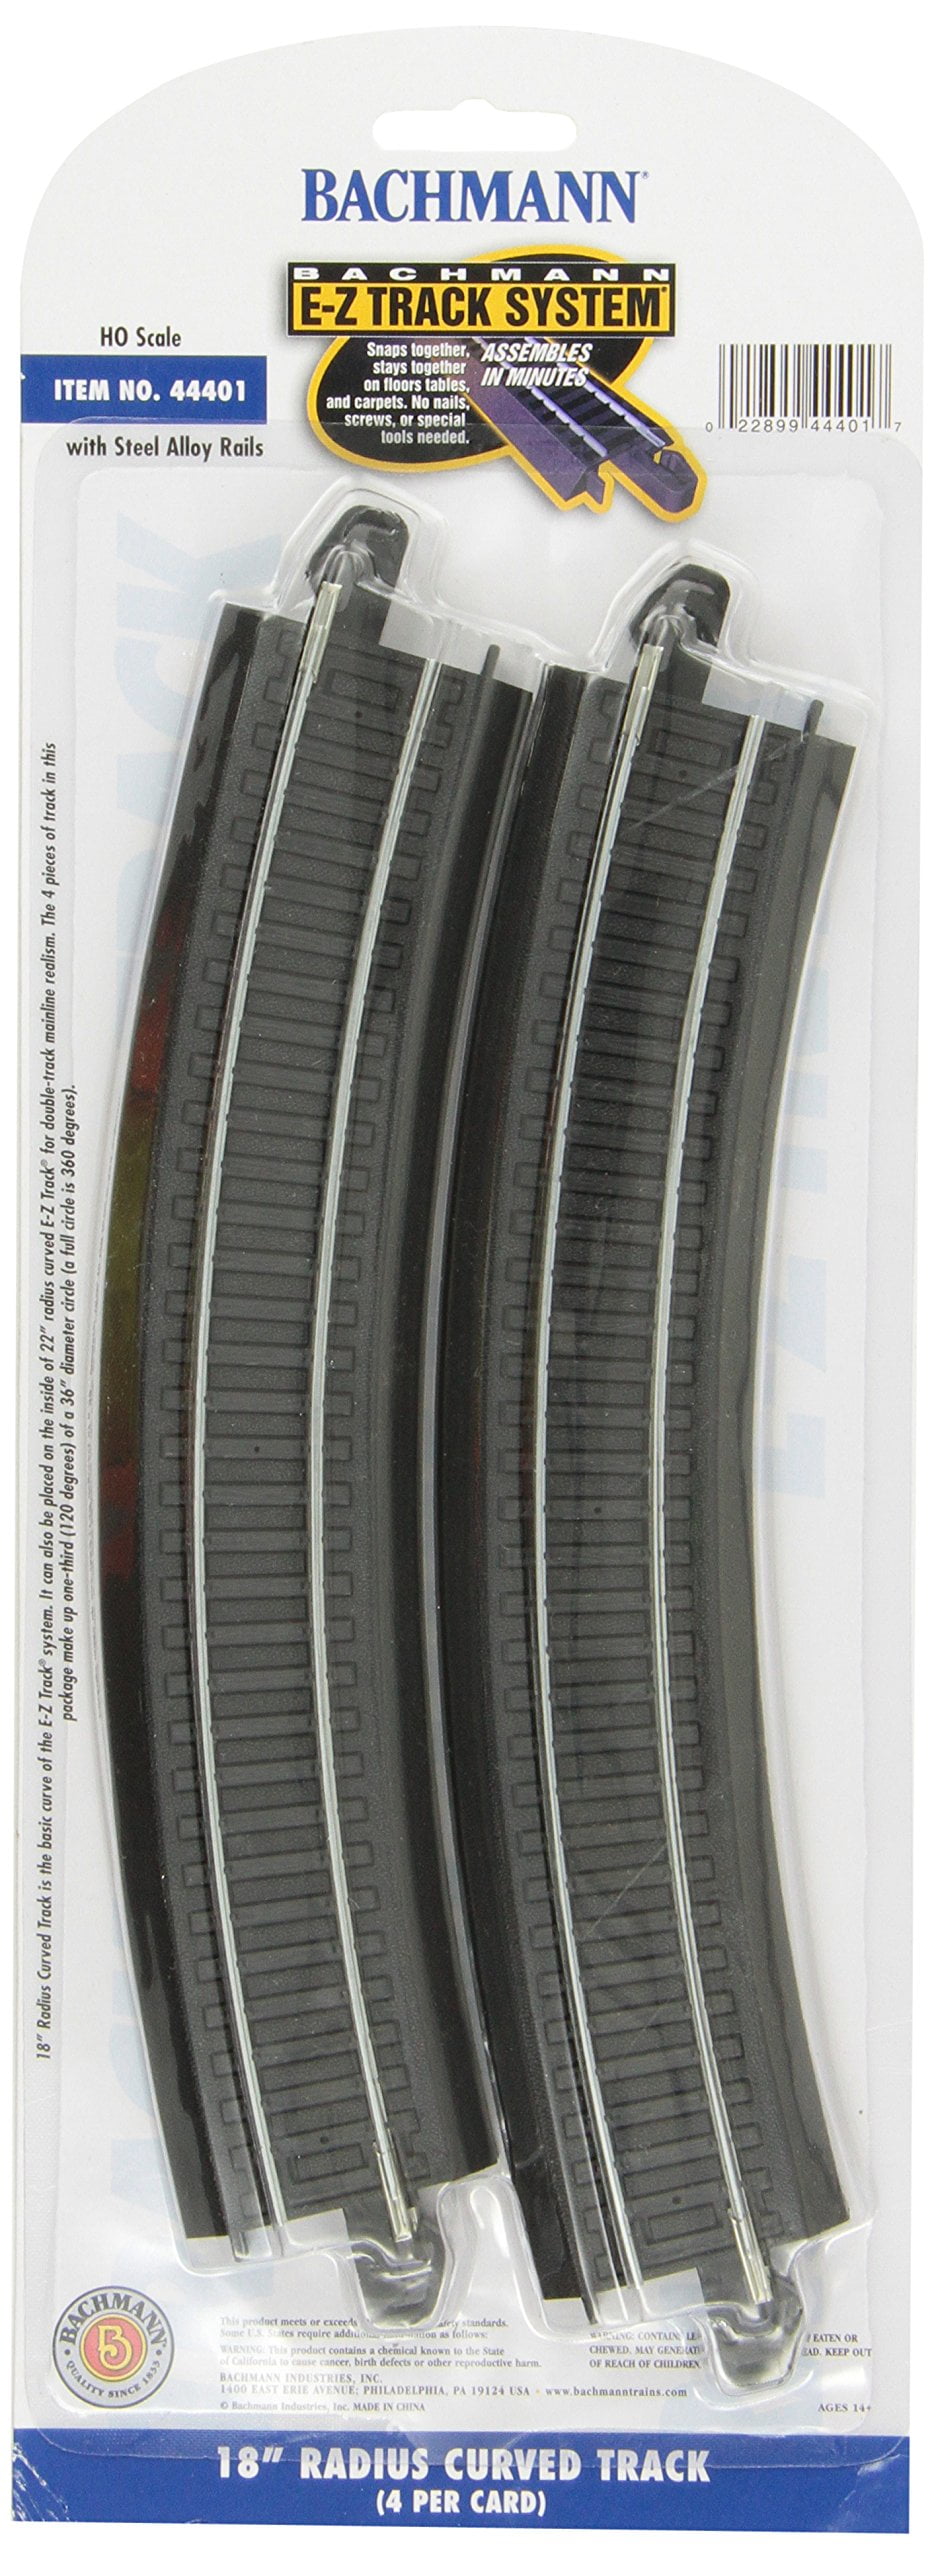 18"RADIUS CURVES ONLY $15.00! TRU-TRACK HO SCALE NICE LOT OF 14 TRU-SCALE 